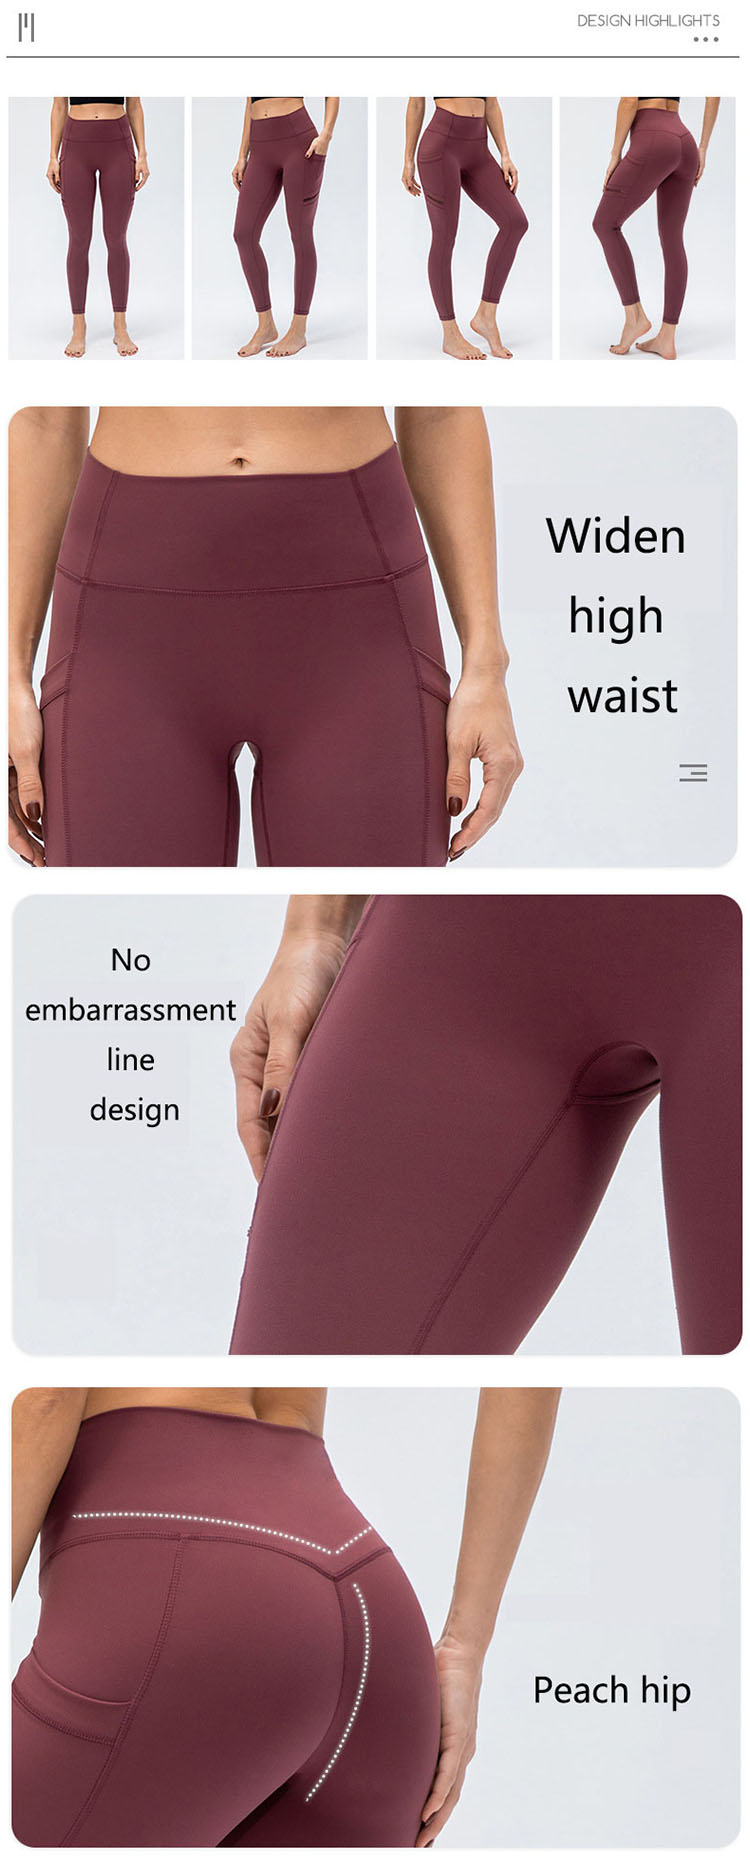 The betabrand dress pant yoga pants design is an important process design for the trousers